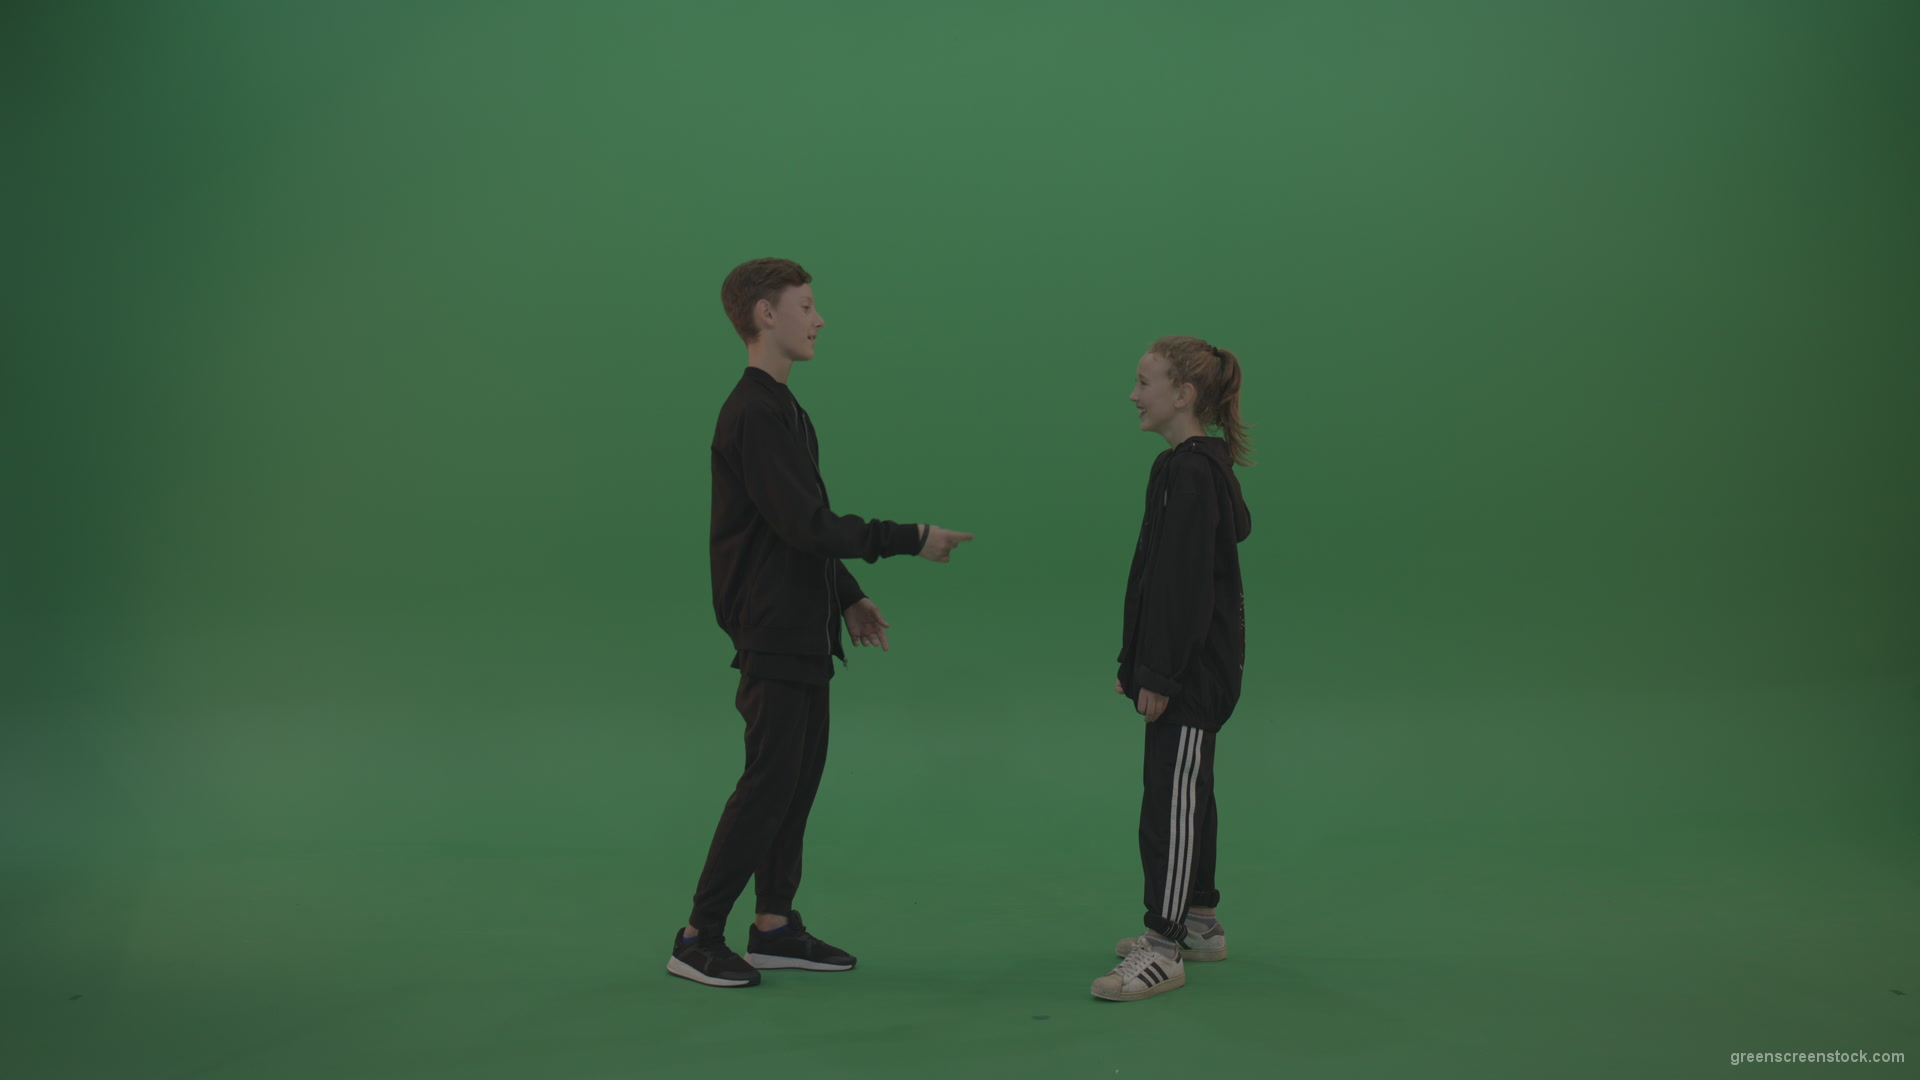 Boy-in-black-wear-talks-to-girl-over-chromakey-background_006 Green Screen Stock